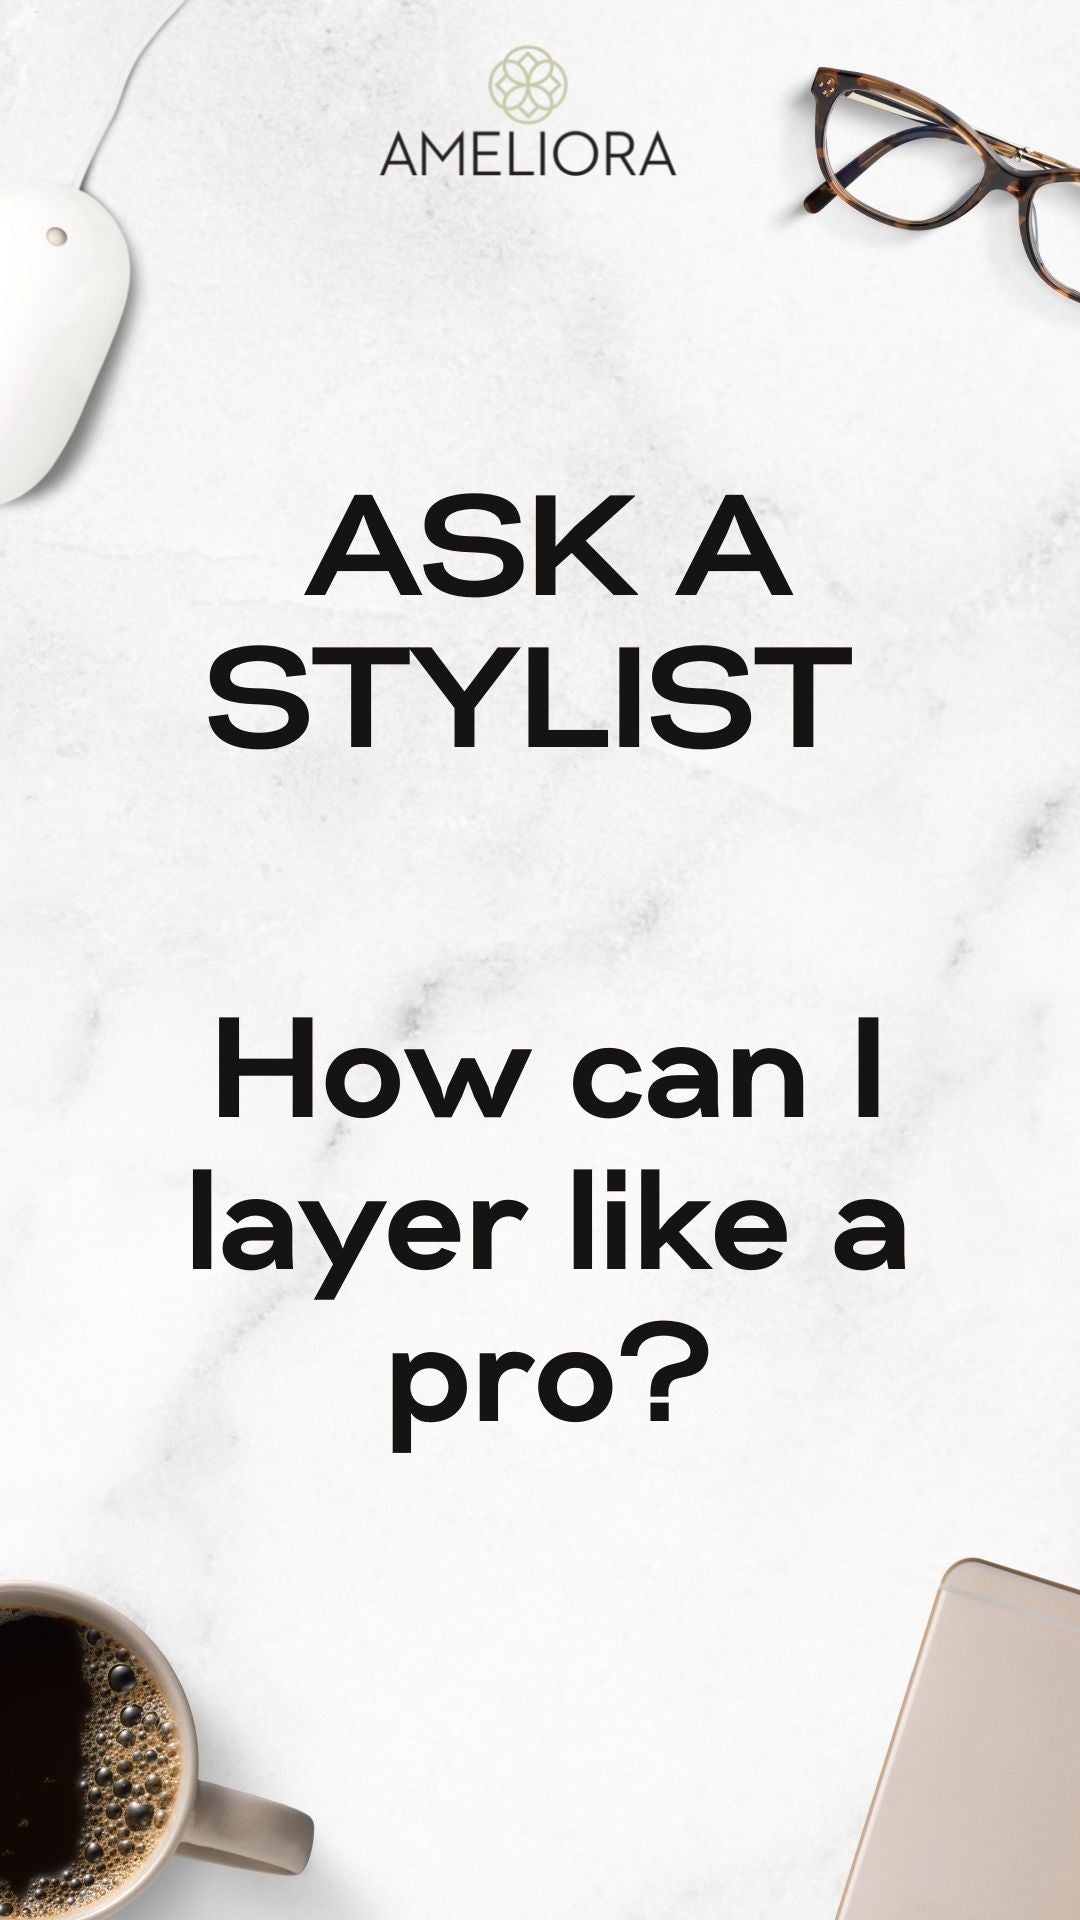 How can I layer like a pro?